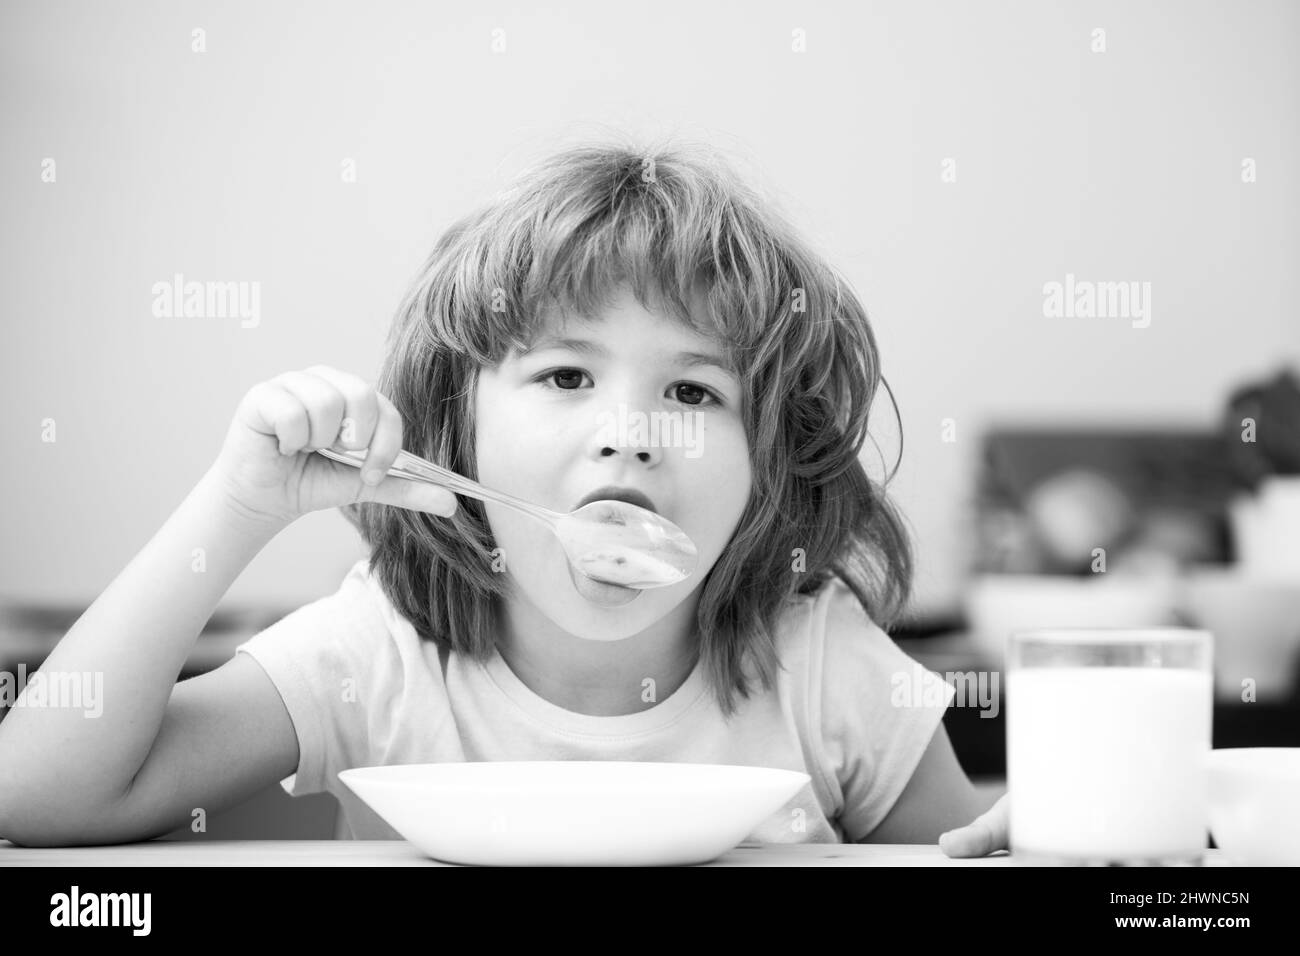 Child eating healthy food. Cute little boy having soup for lunch. Child nutrition. Stock Photo